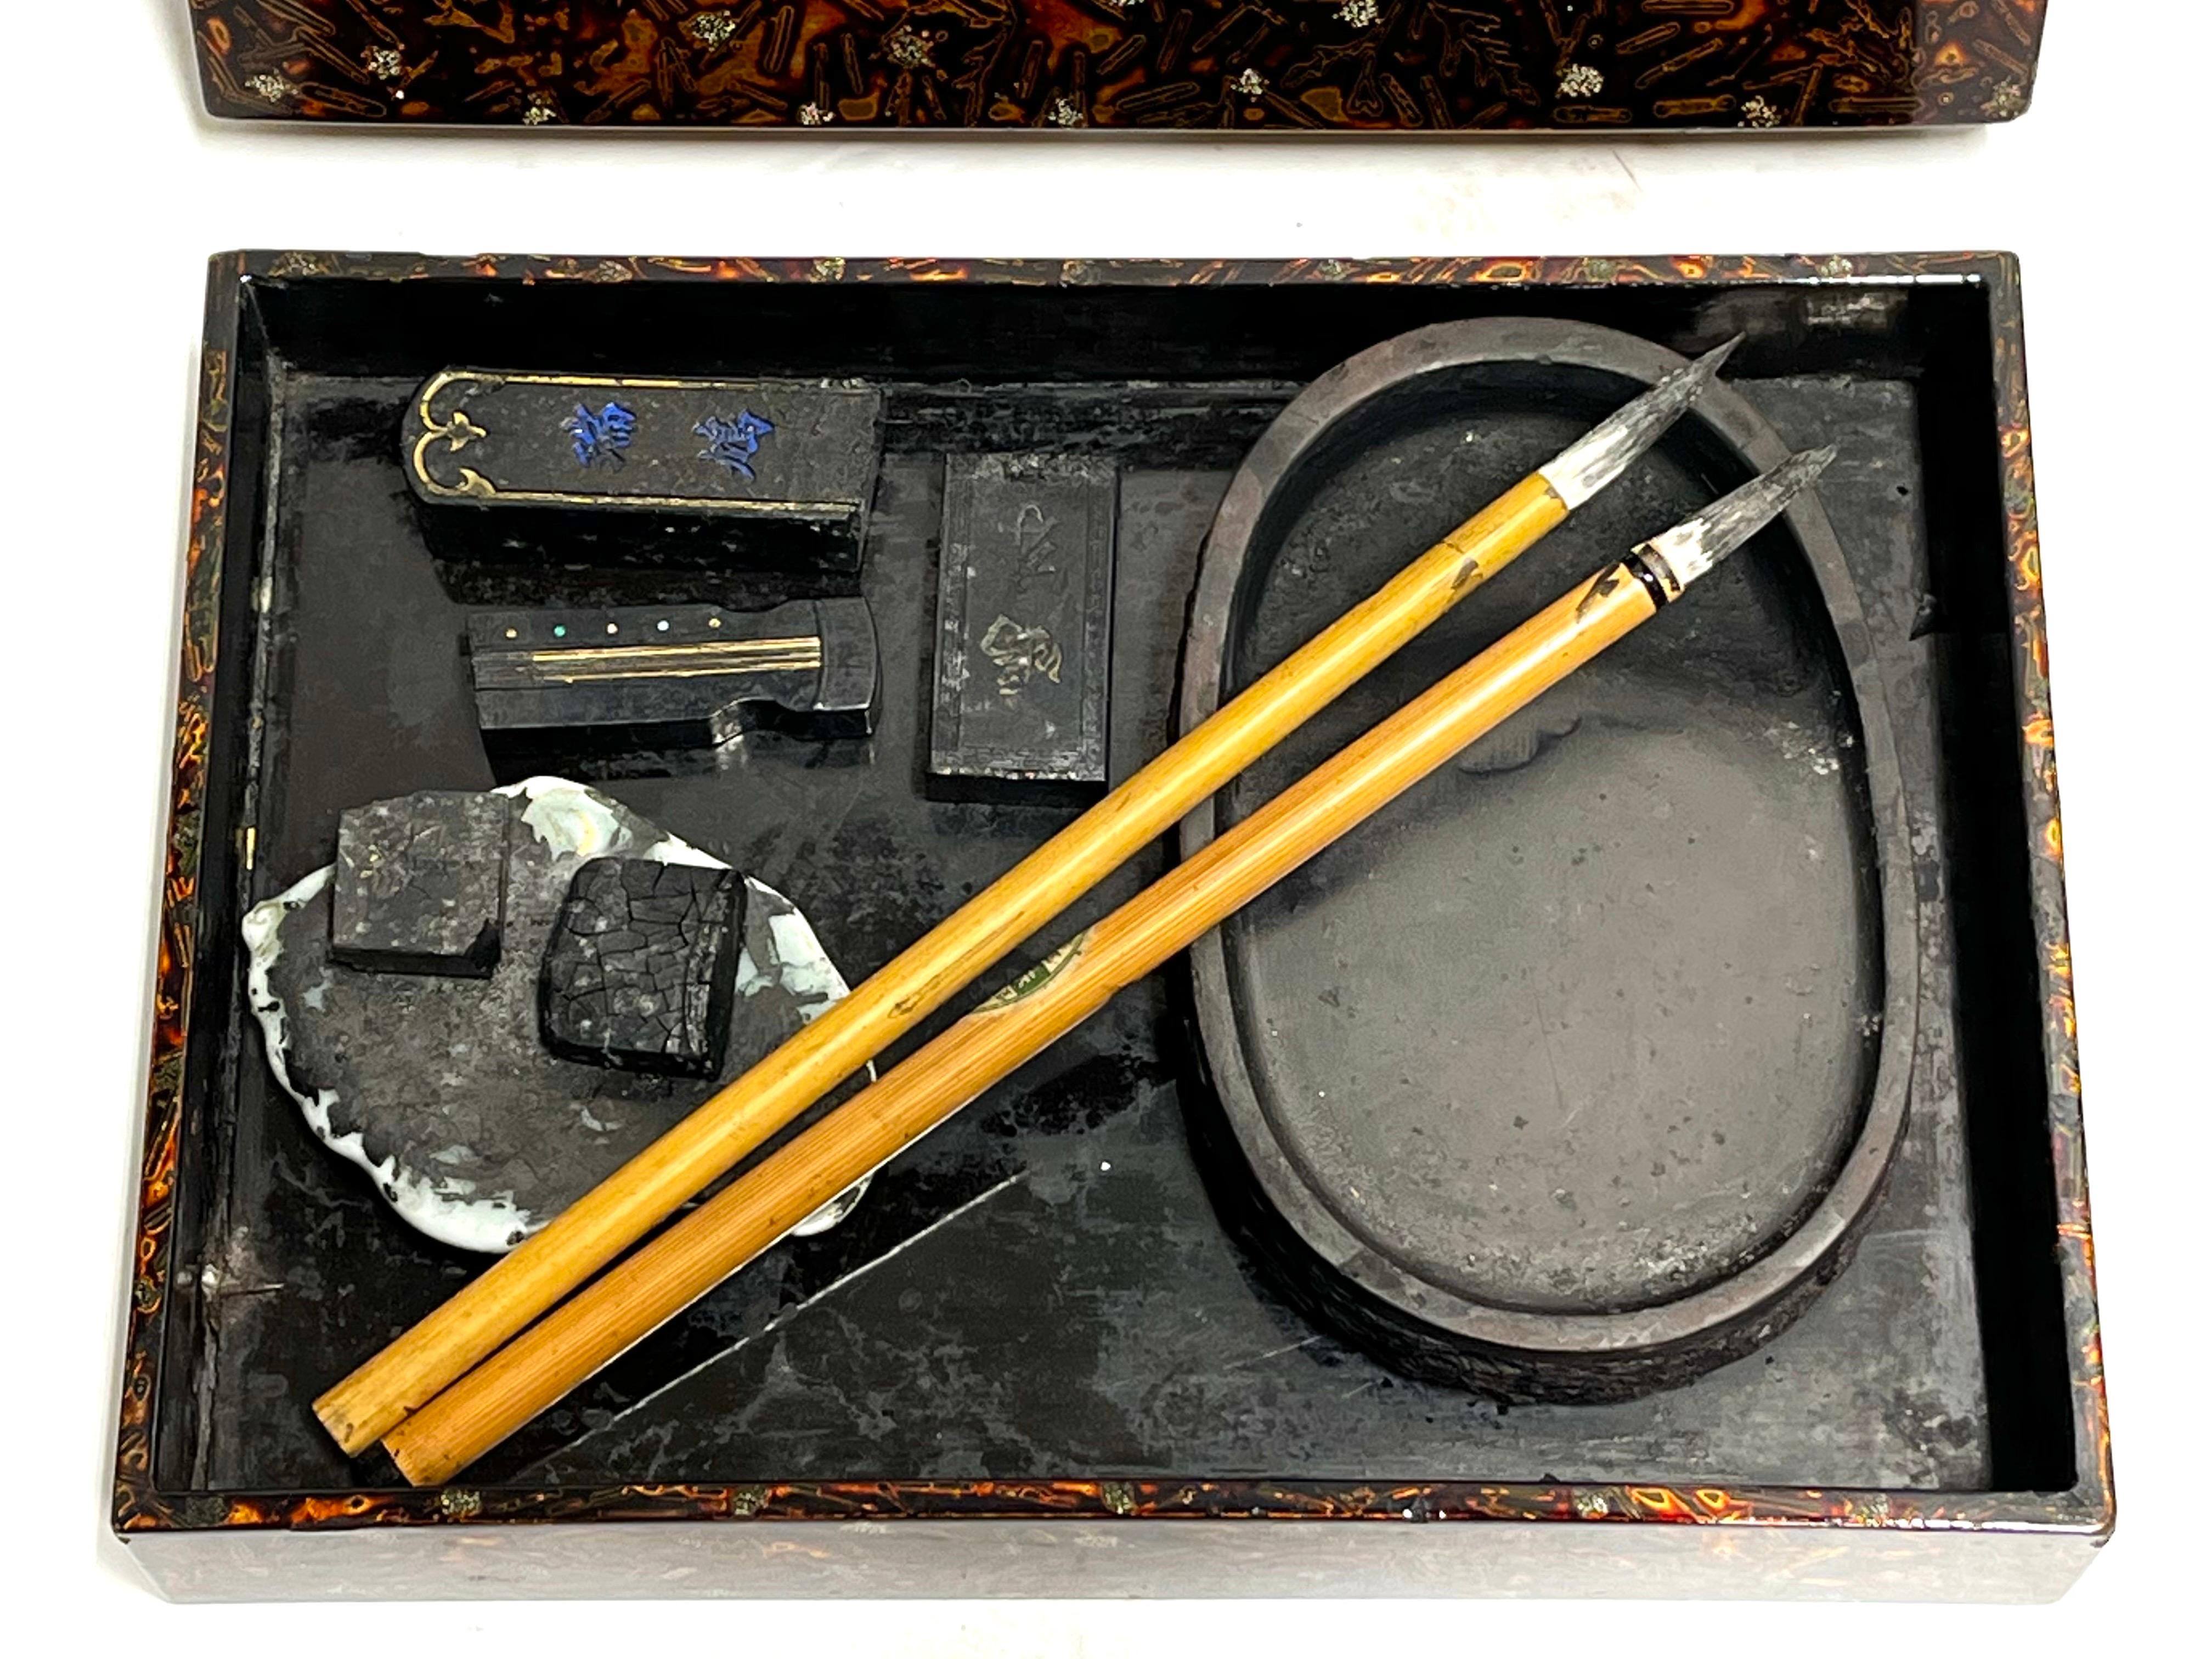 An antique Asian, lacquered and signed wood writing or calligraphy box with carved and signed ink stones and brushes. This set has been used. For a bit about the history of lacquer I offer an excerpt from an article on the visual arts website, 